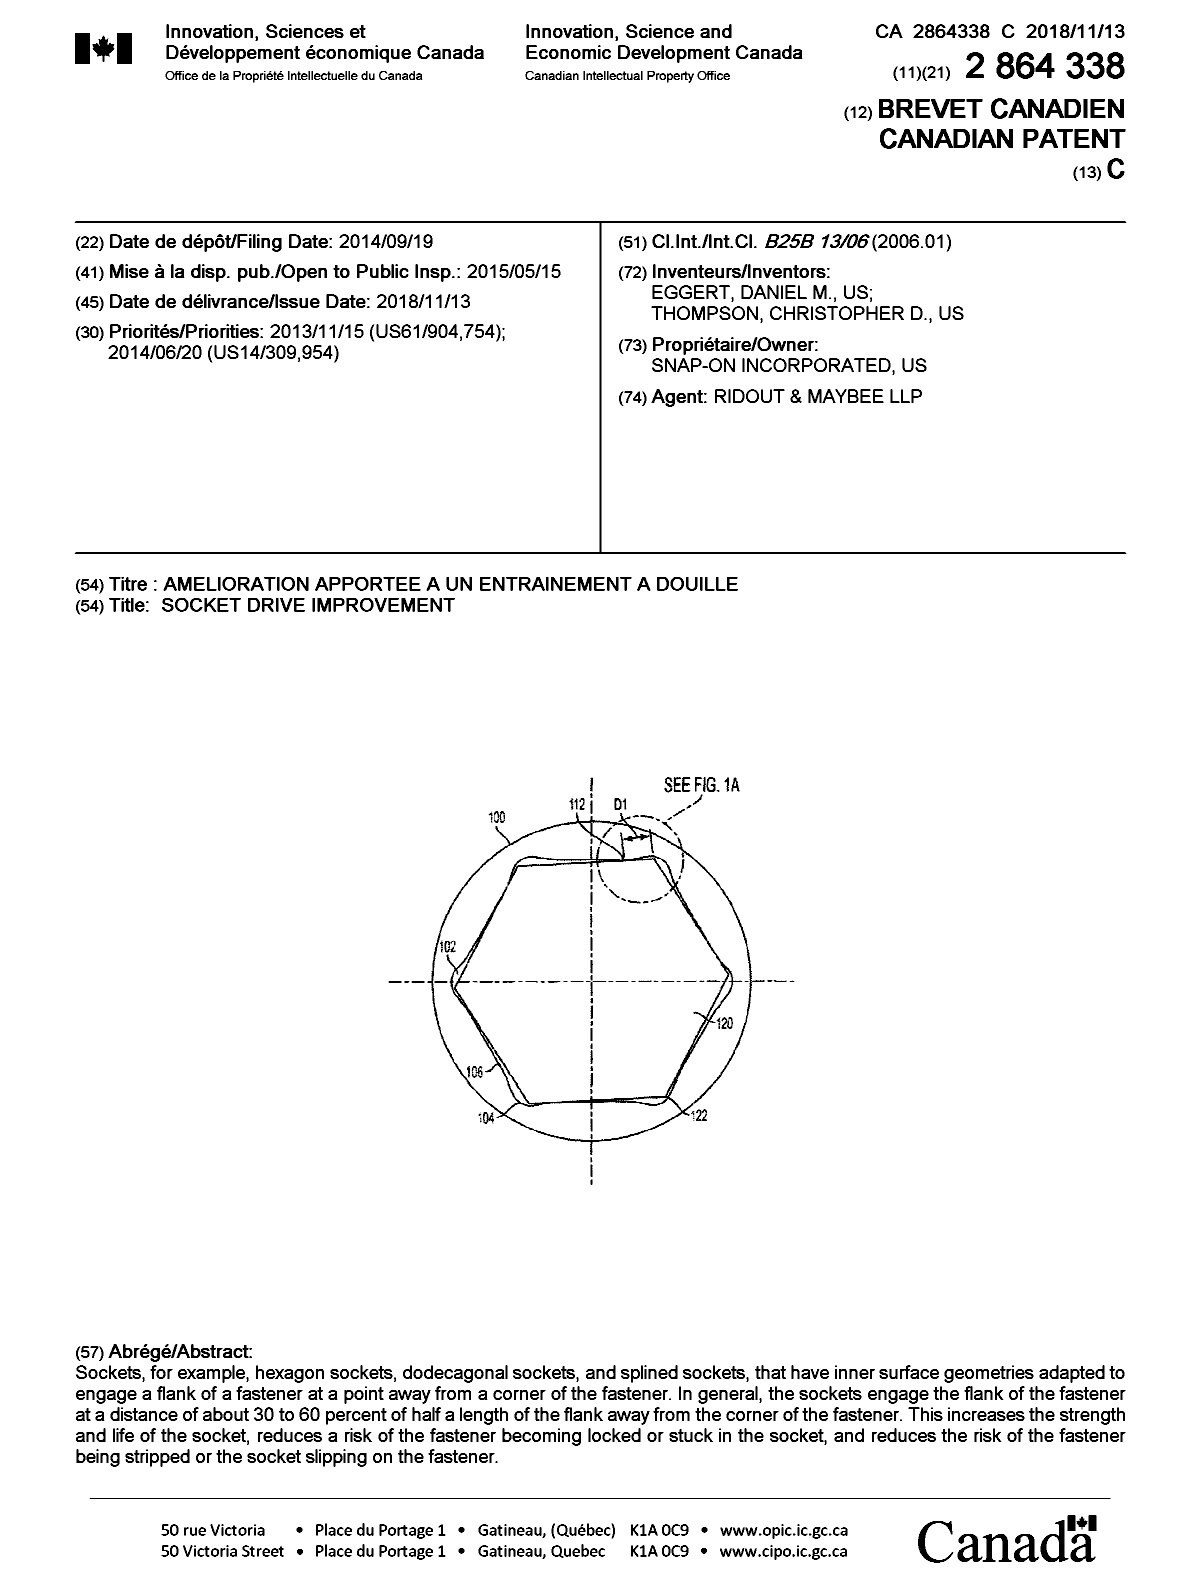 Canadian Patent Document 2864338. Cover Page 20181015. Image 1 of 1